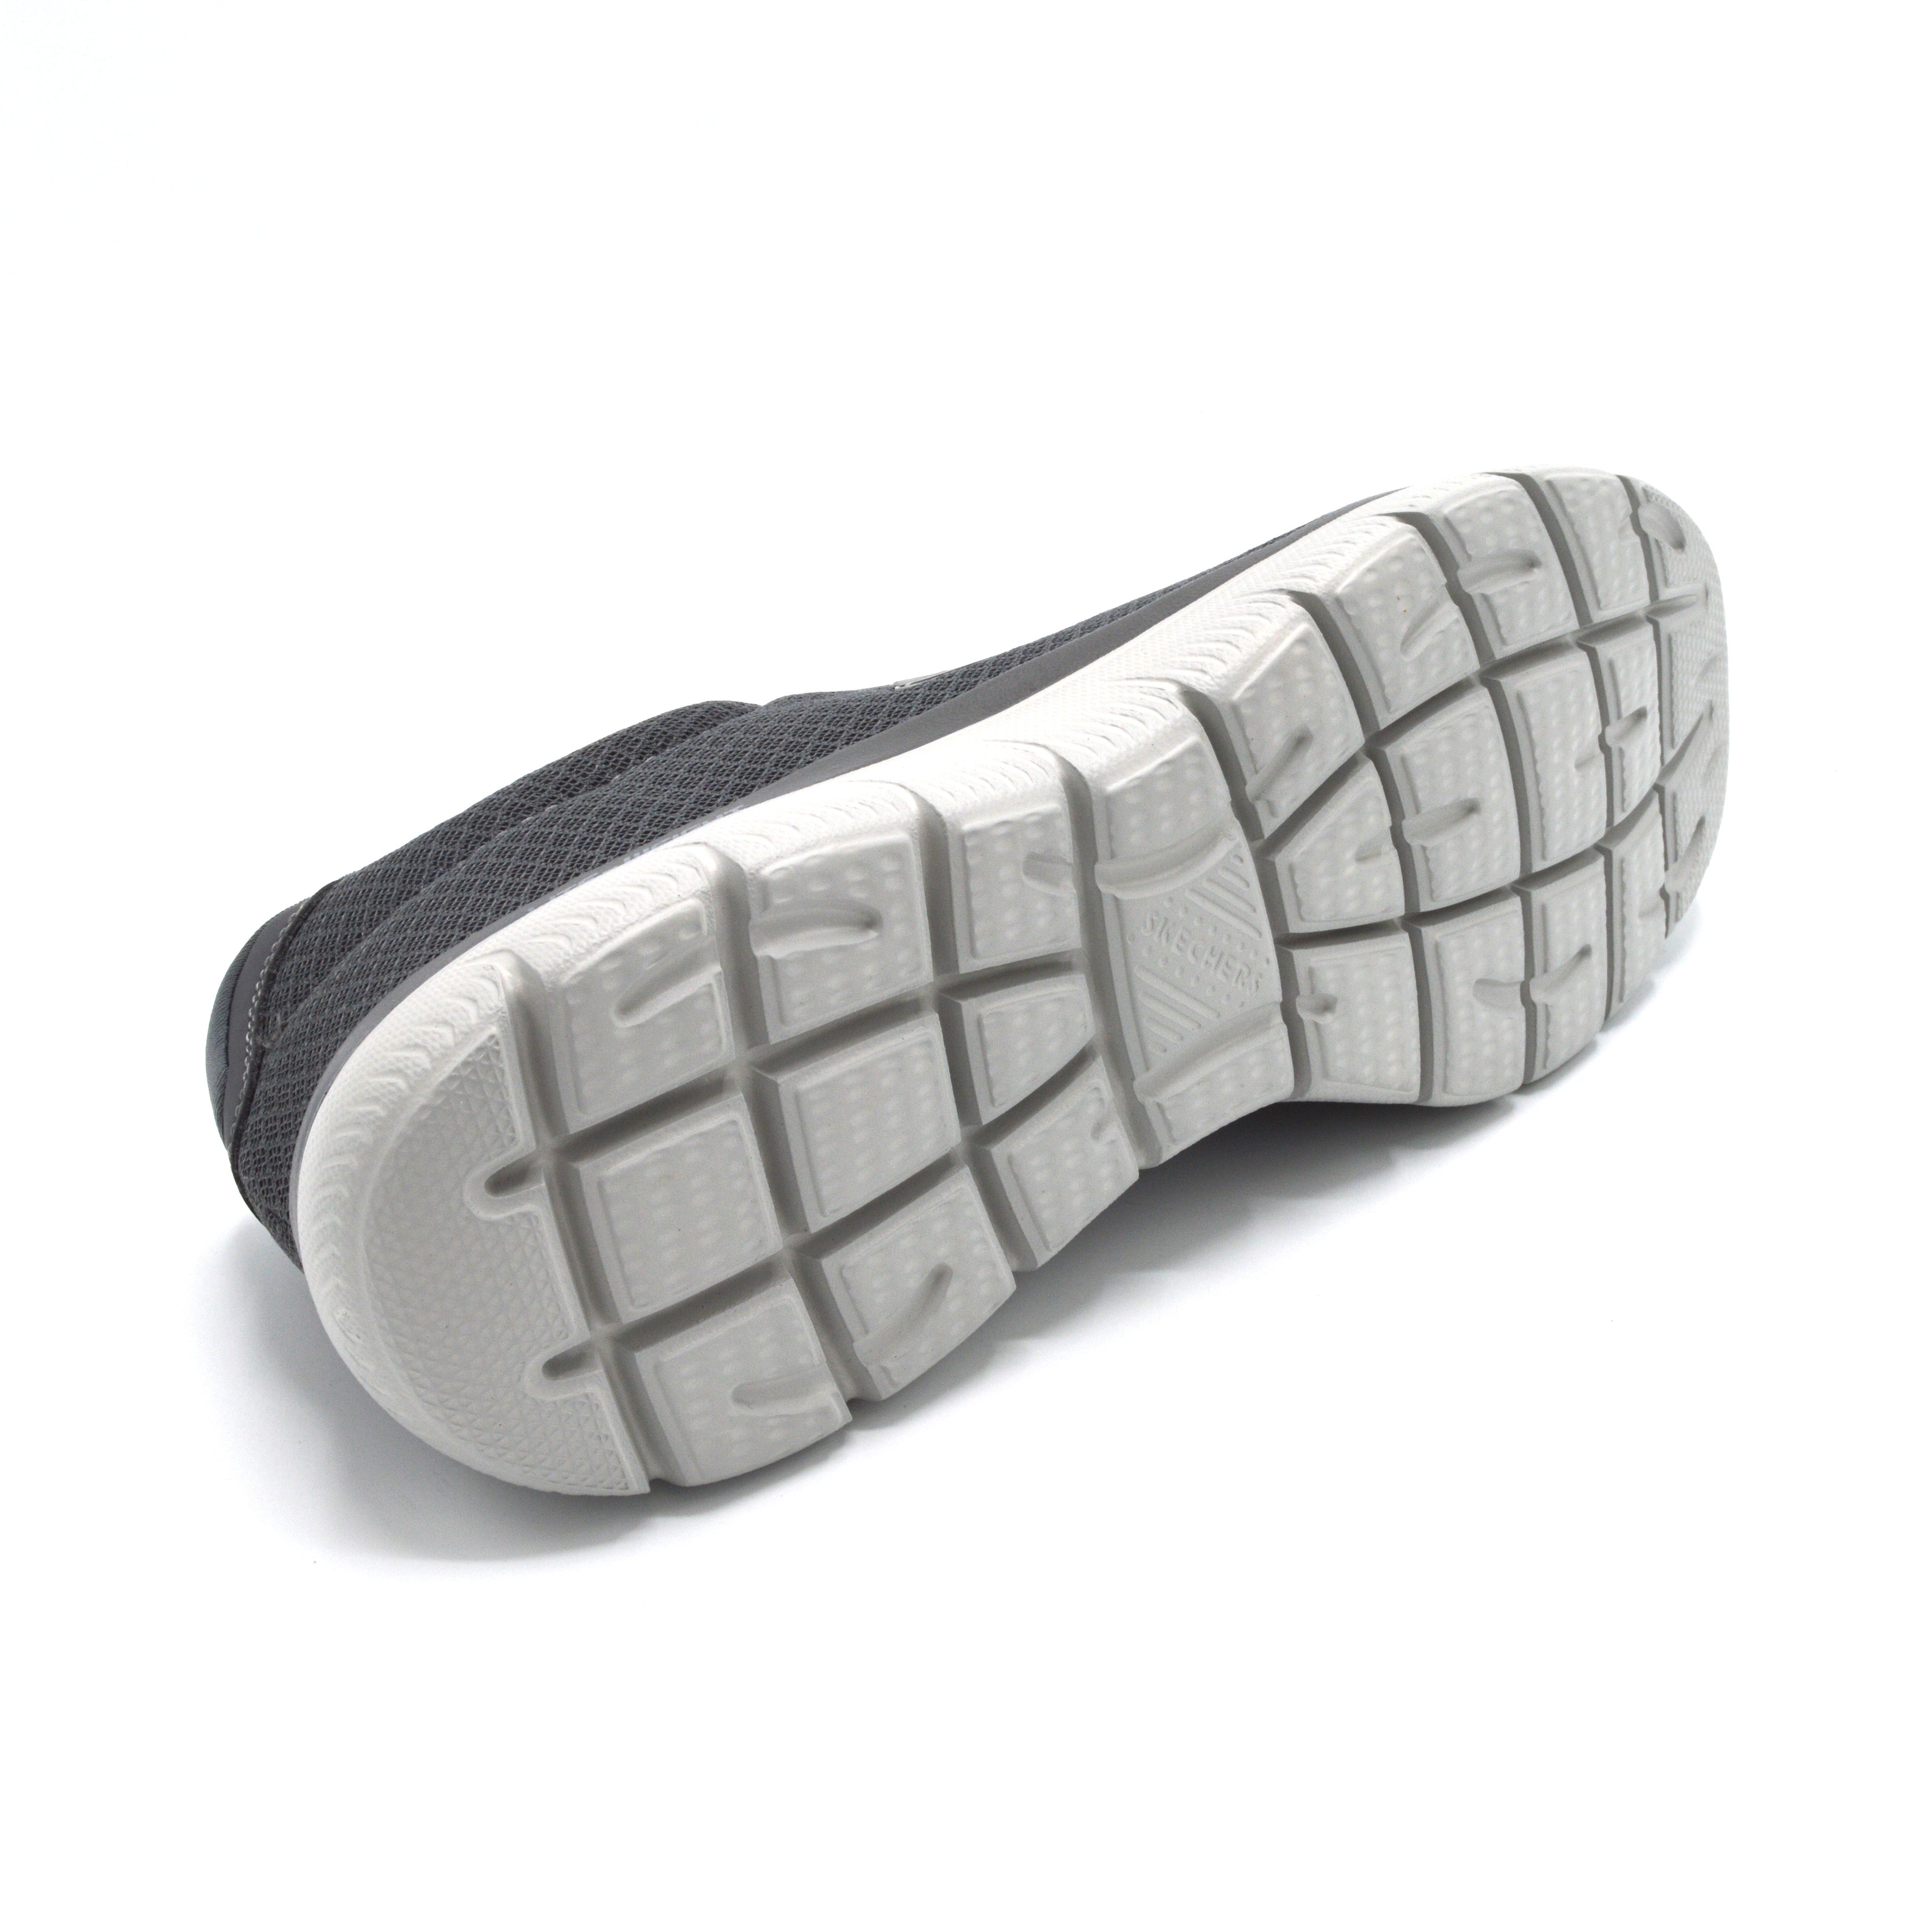 Light Weight Wide Fit Trainer For Bunions